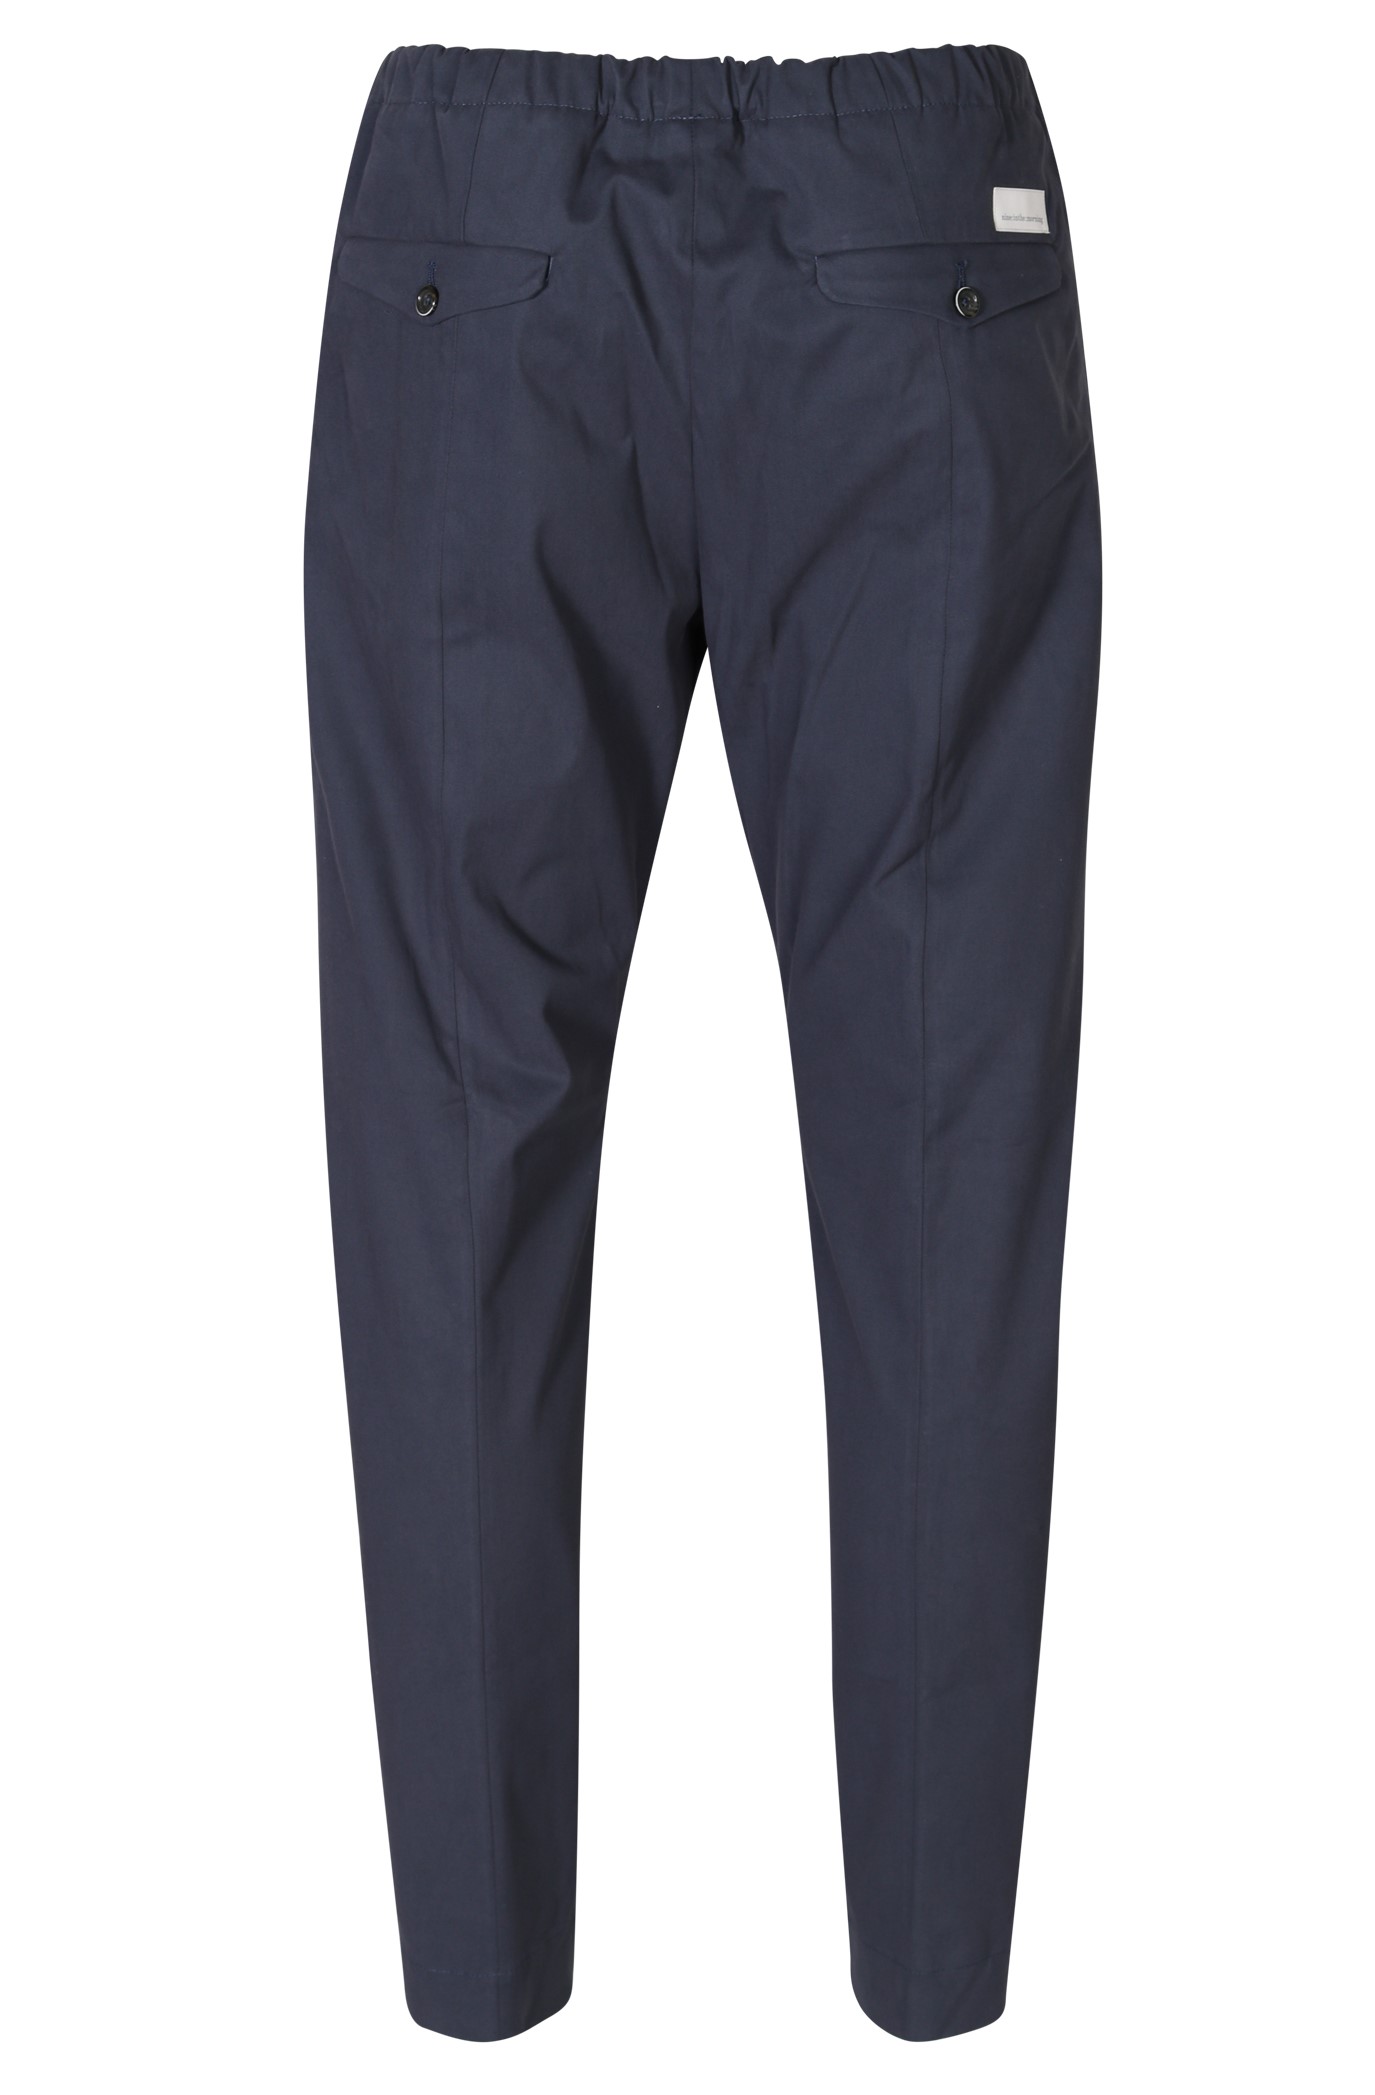 NINE:INTHE:MORNING Mirco Carrot Cotton Stretch Pant in Blue Navy 54